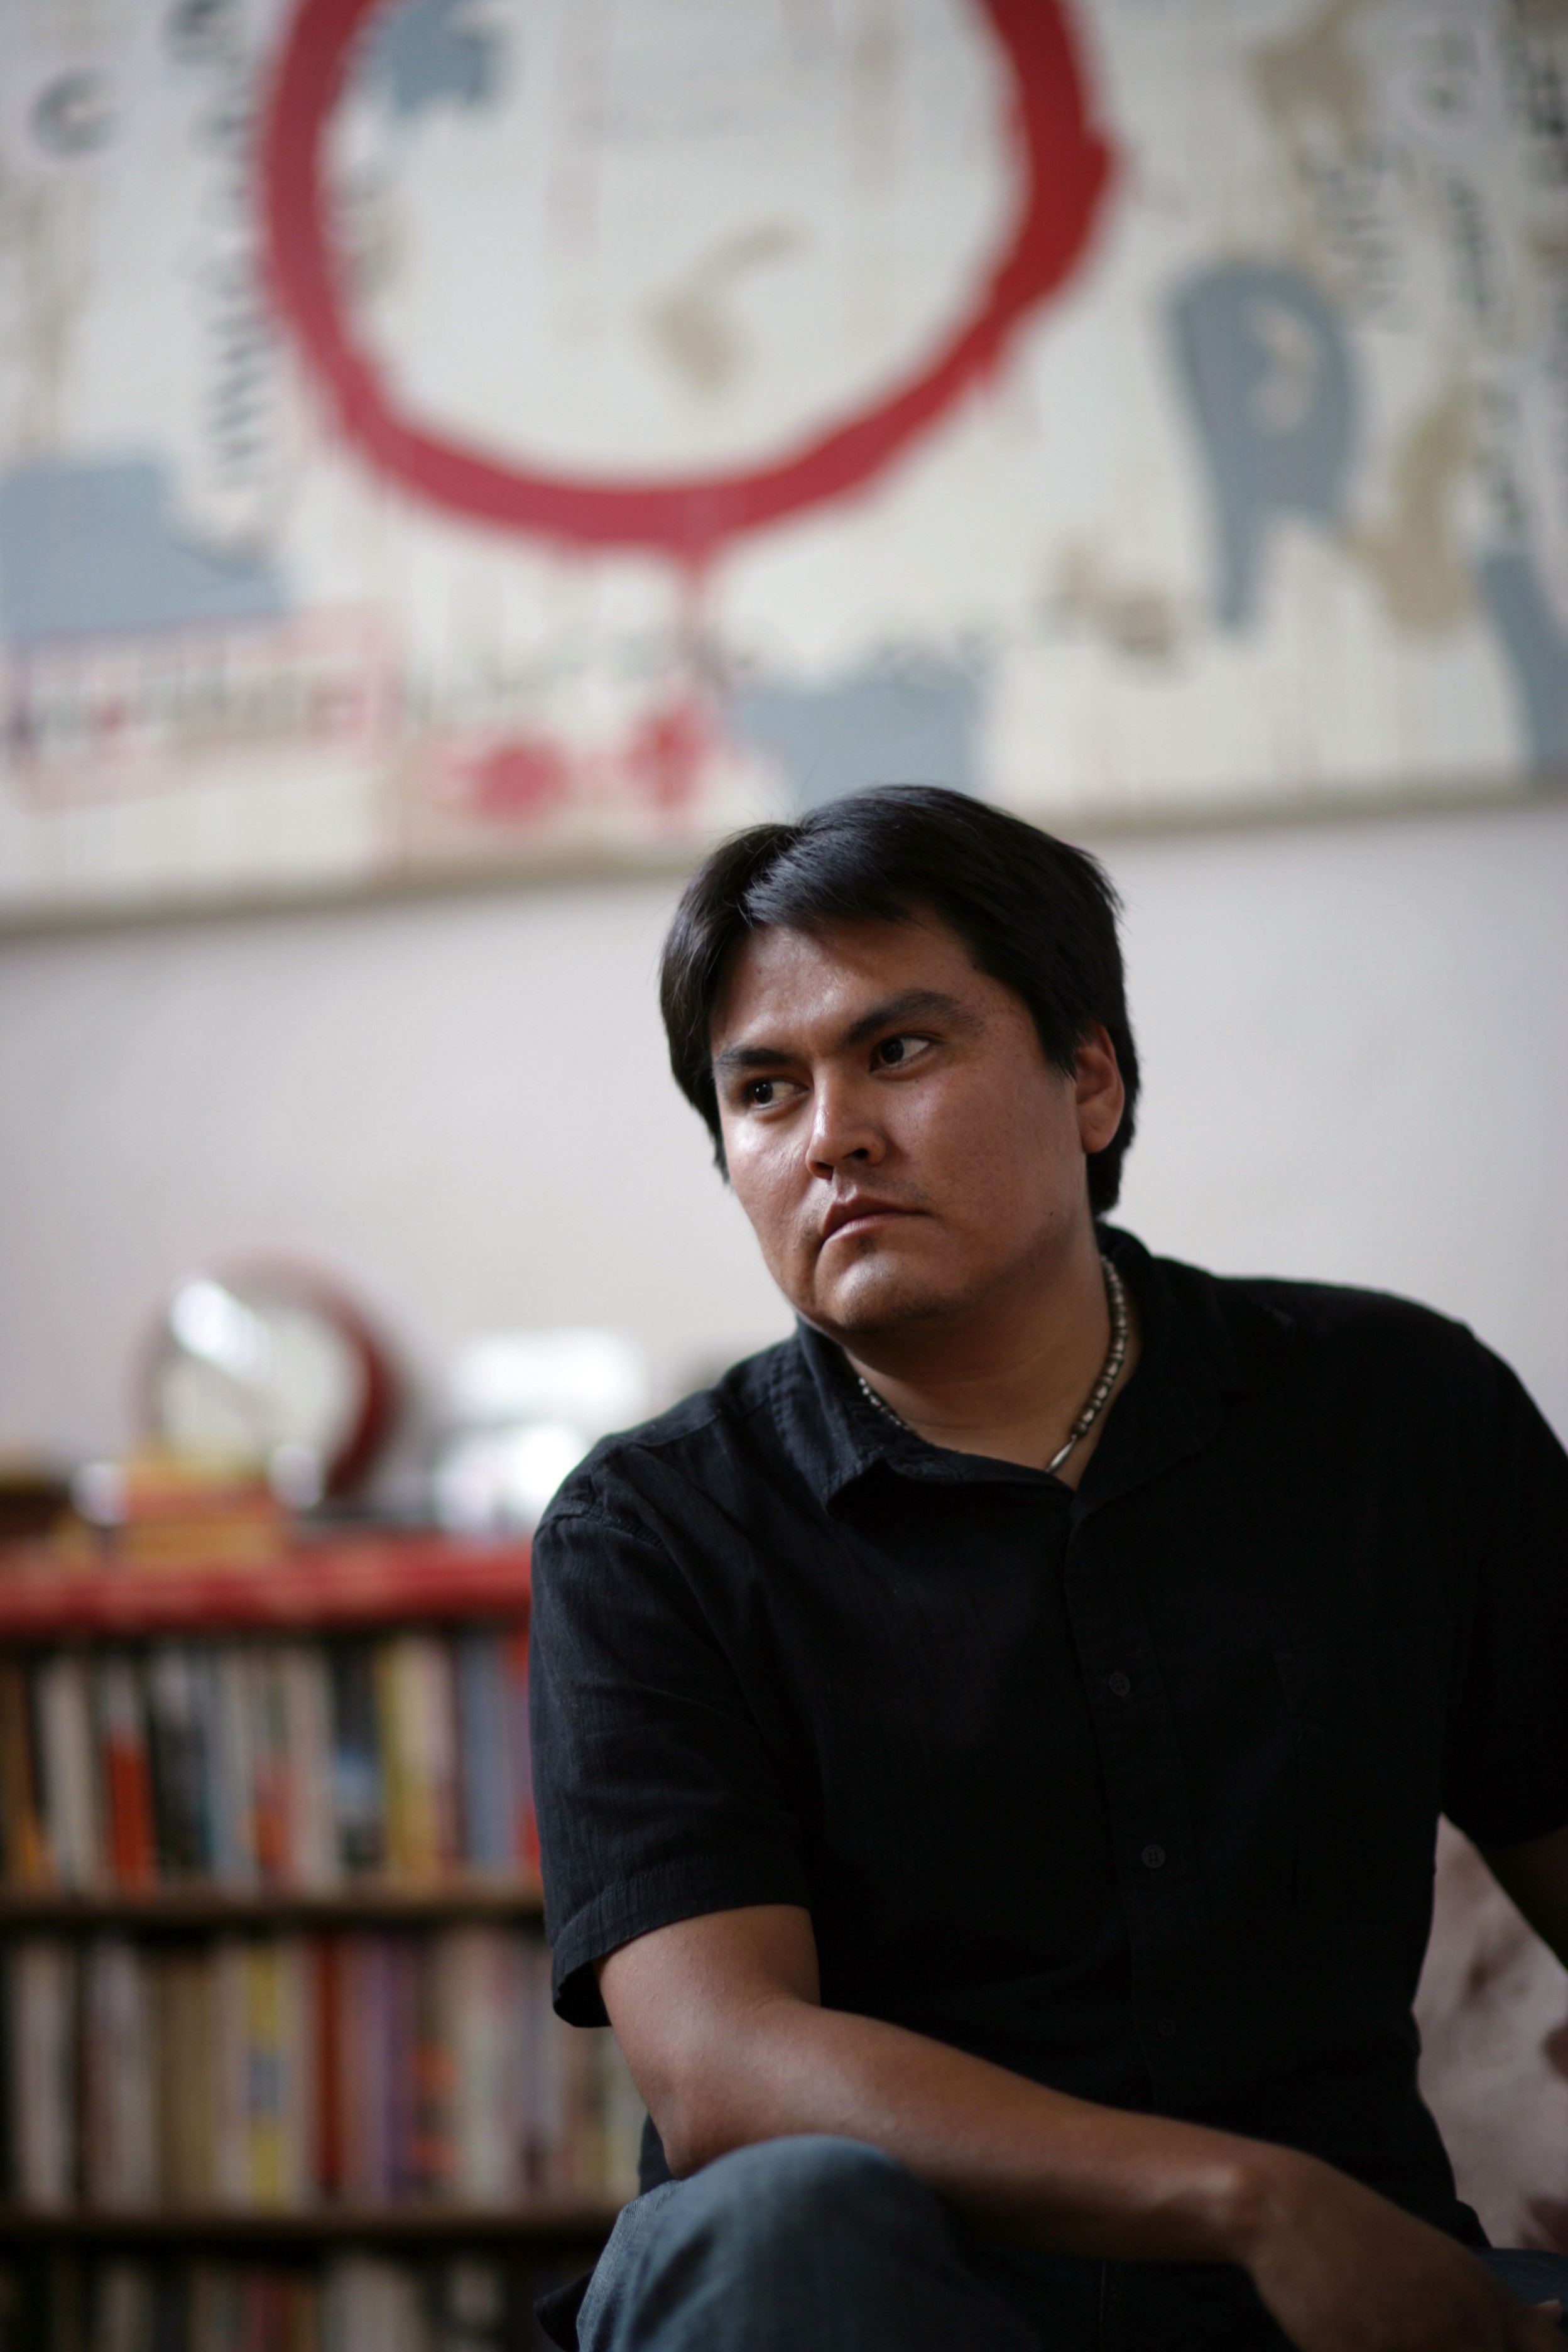 Sherwin Bitsui sitting in front of book shelves.